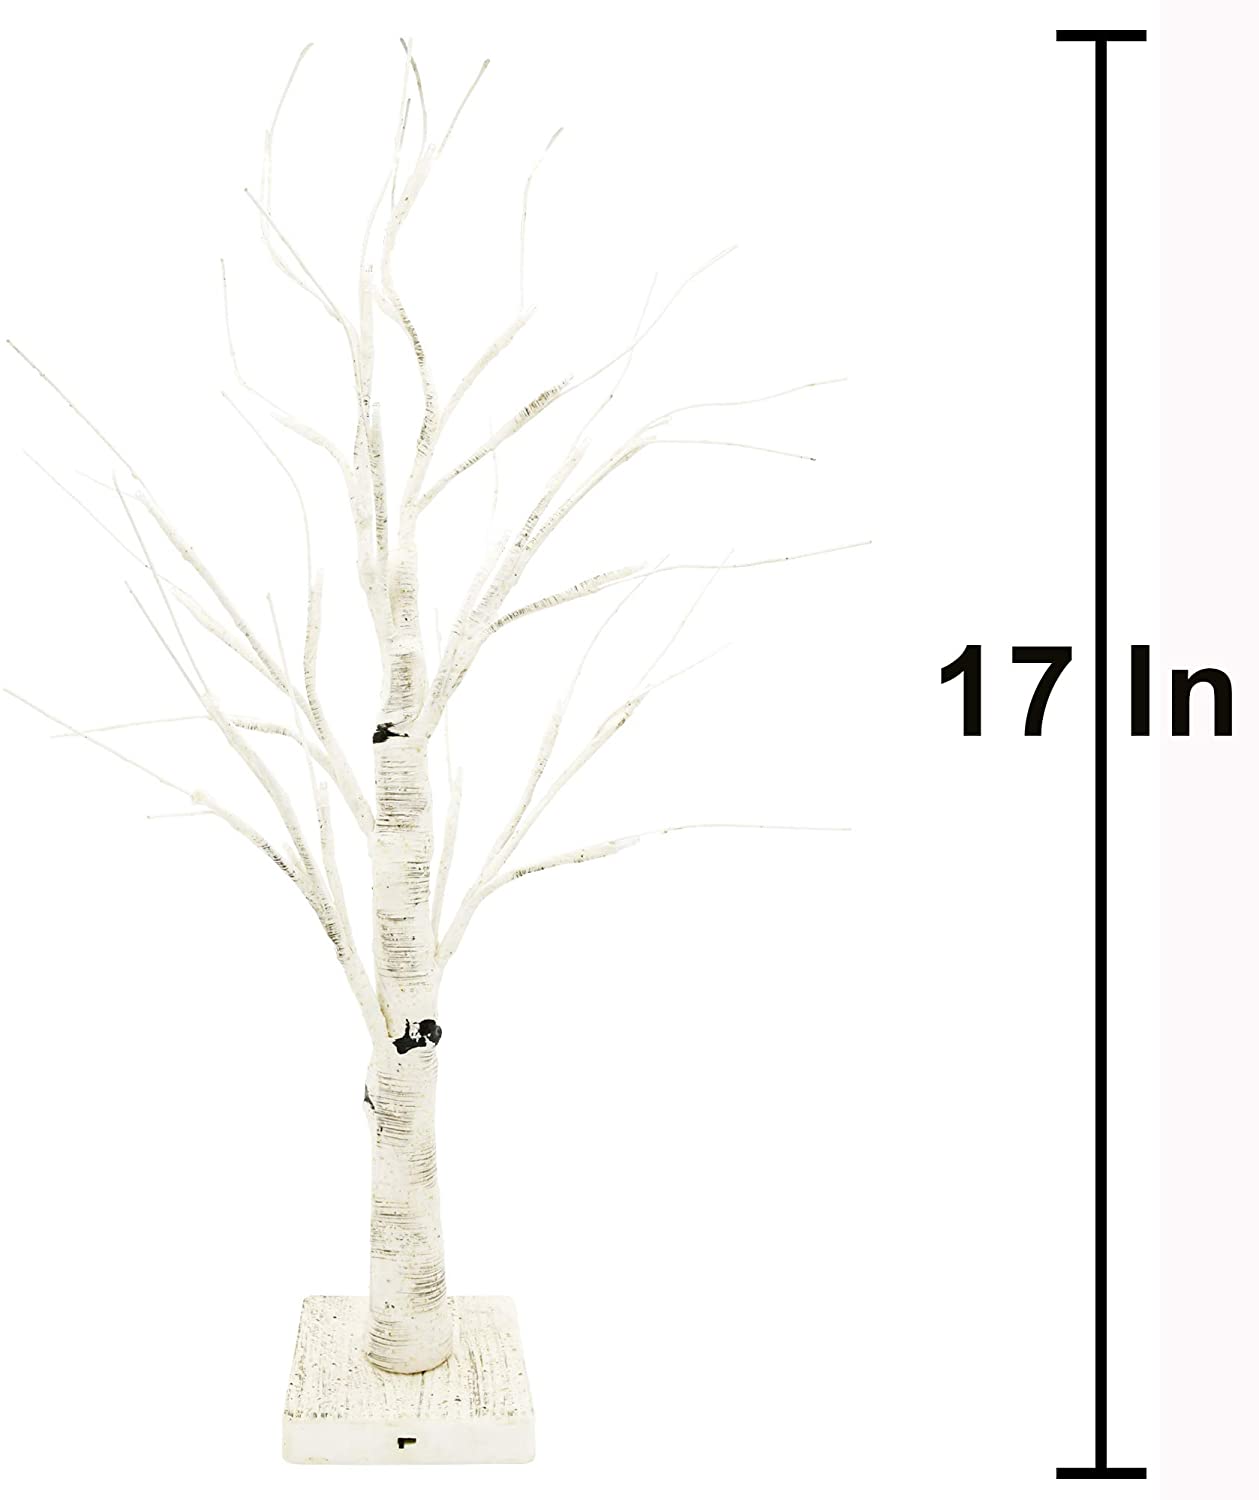 24in LED Birch Tree with 24 Warm White Lights